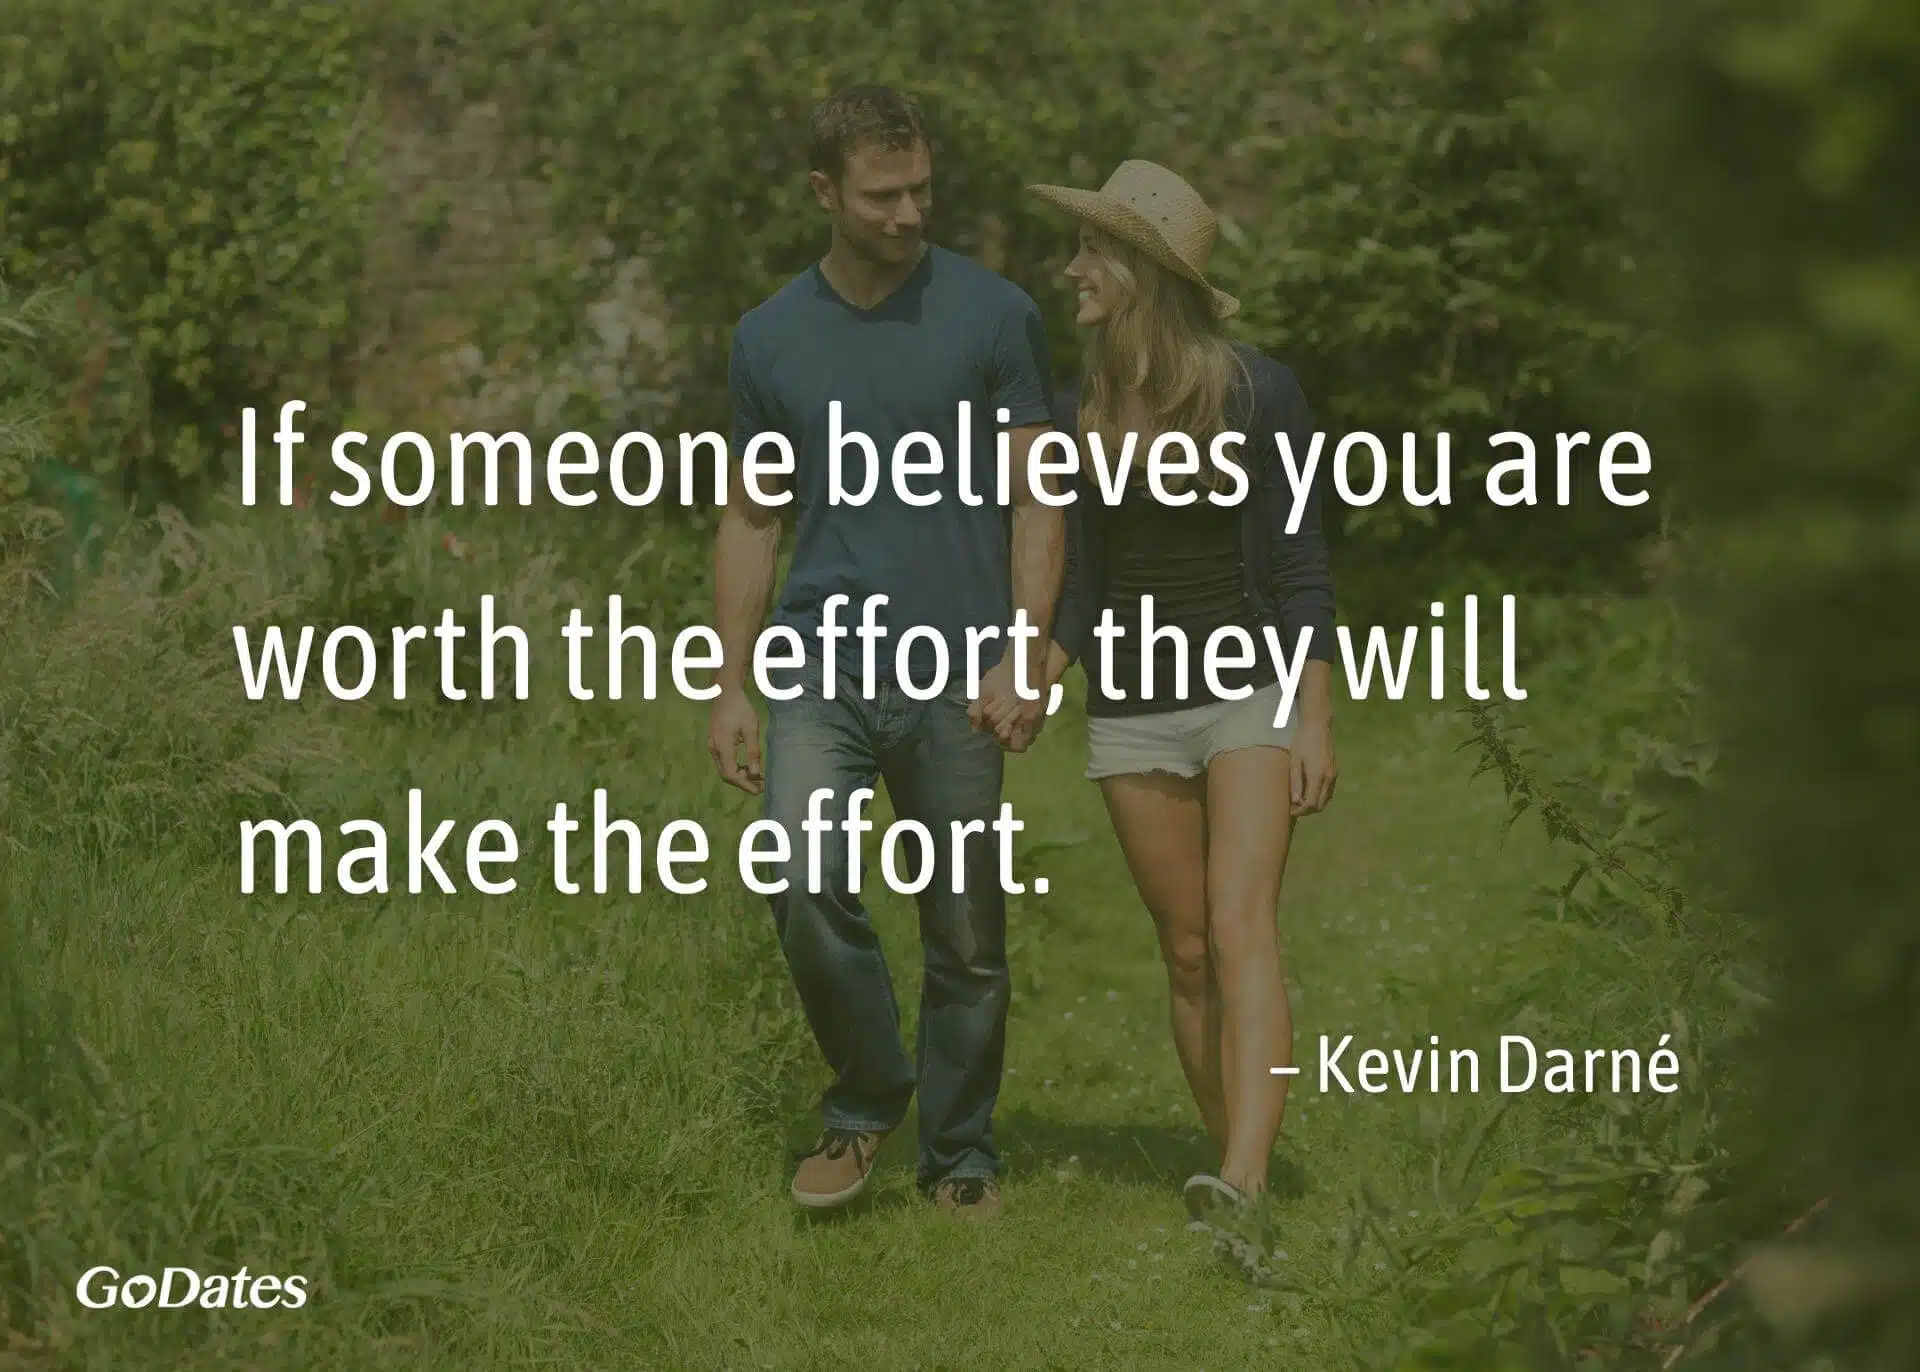 If somebody believes you are worth effort they will make effort quote